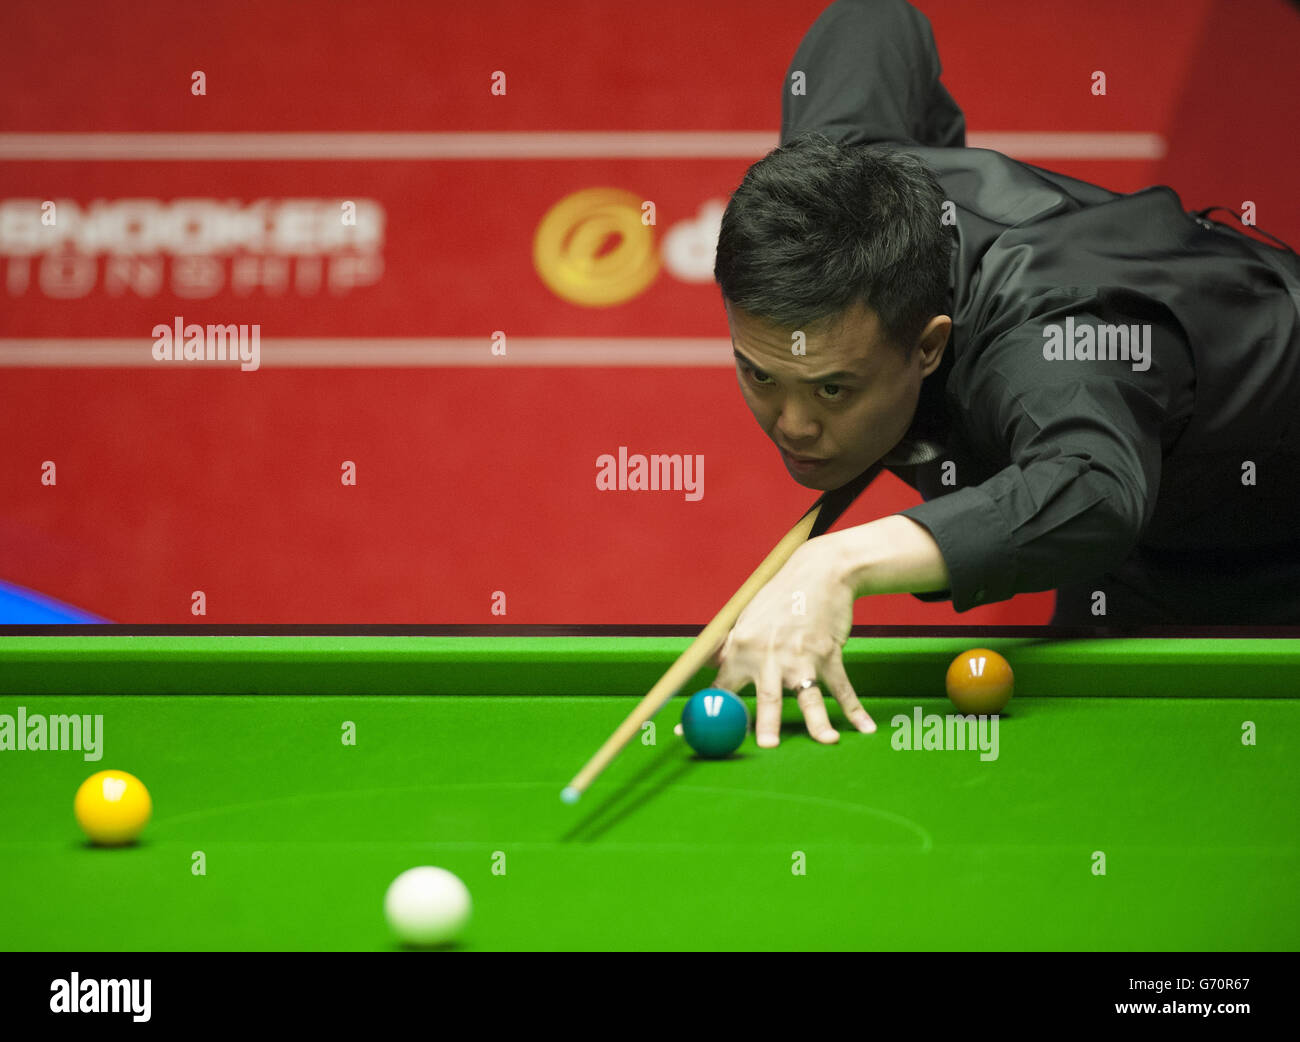 Marco Fu during his match against Martin Gould during the Dafabet World Snooker Championships at The Crucible, Sheffield. PRESS ASSOCIATION Photo. Picture date: Wednesday April 23, 2014. See PA story SNOOKER World. Photo credit should read: Tim Goode/PA Wire Stock Photo